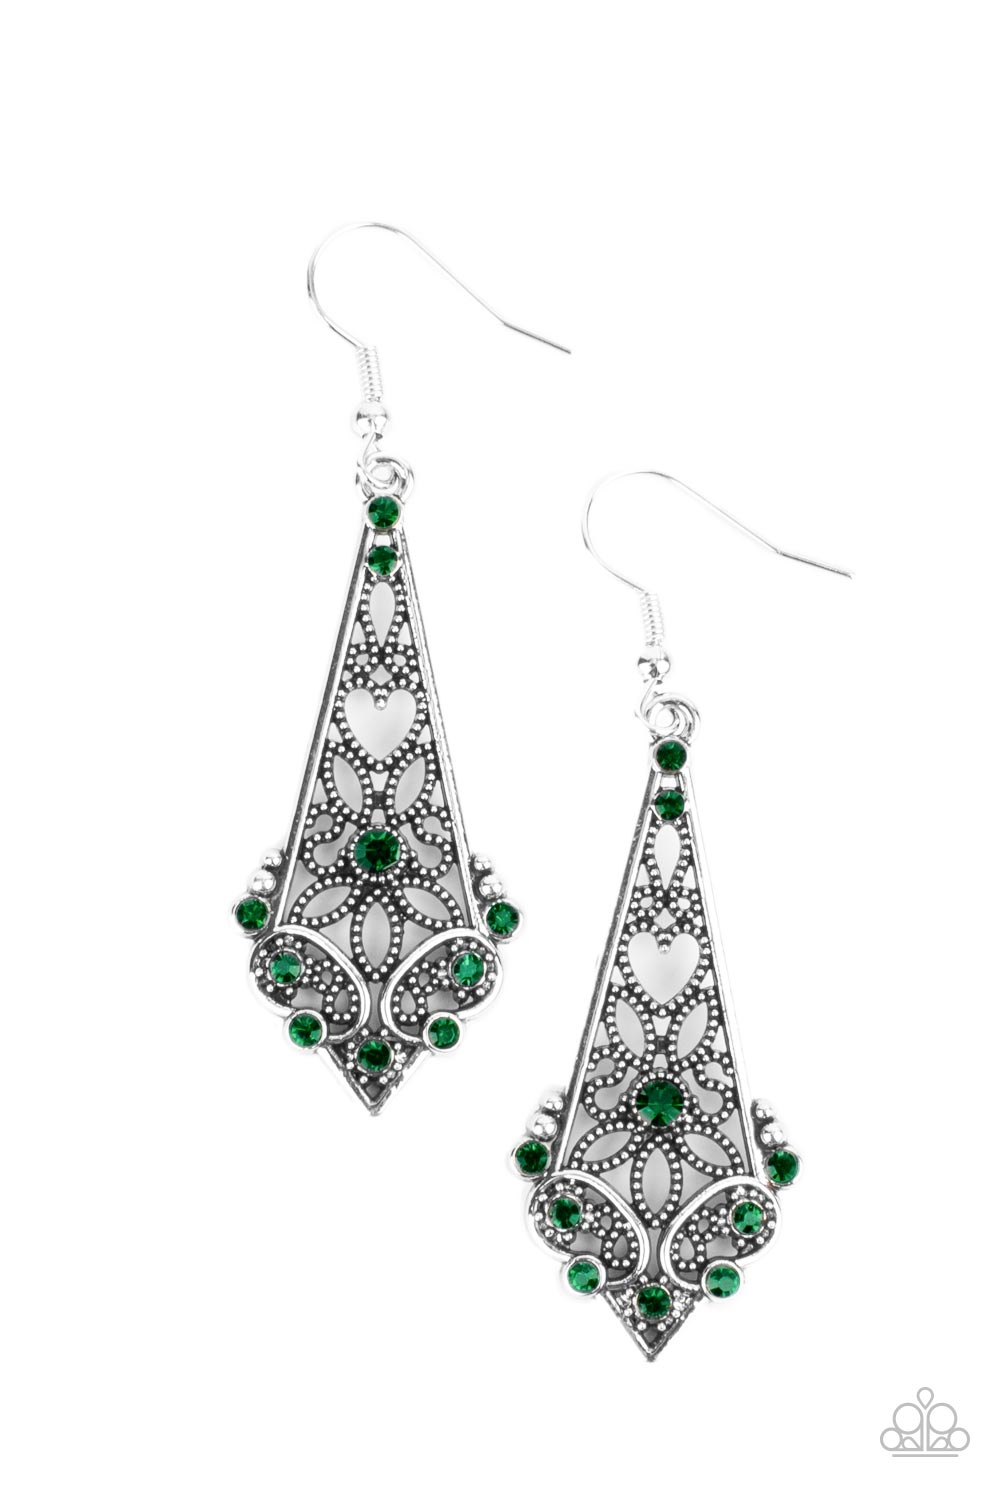 Casablanca Charisma - Green and Silver - Heart and Flower Earrings - Heart and flower filigree motifs permeate an elongated diamond-shaped silver frame. Dainty green rhinestones scatter across the design creating a whimsical lure. Earring attaches to a standard fishhook fitting. Sold as one pair of earrings. Bejeweled Accessories By Kristie - Trendy fashion jewelry for everyone -